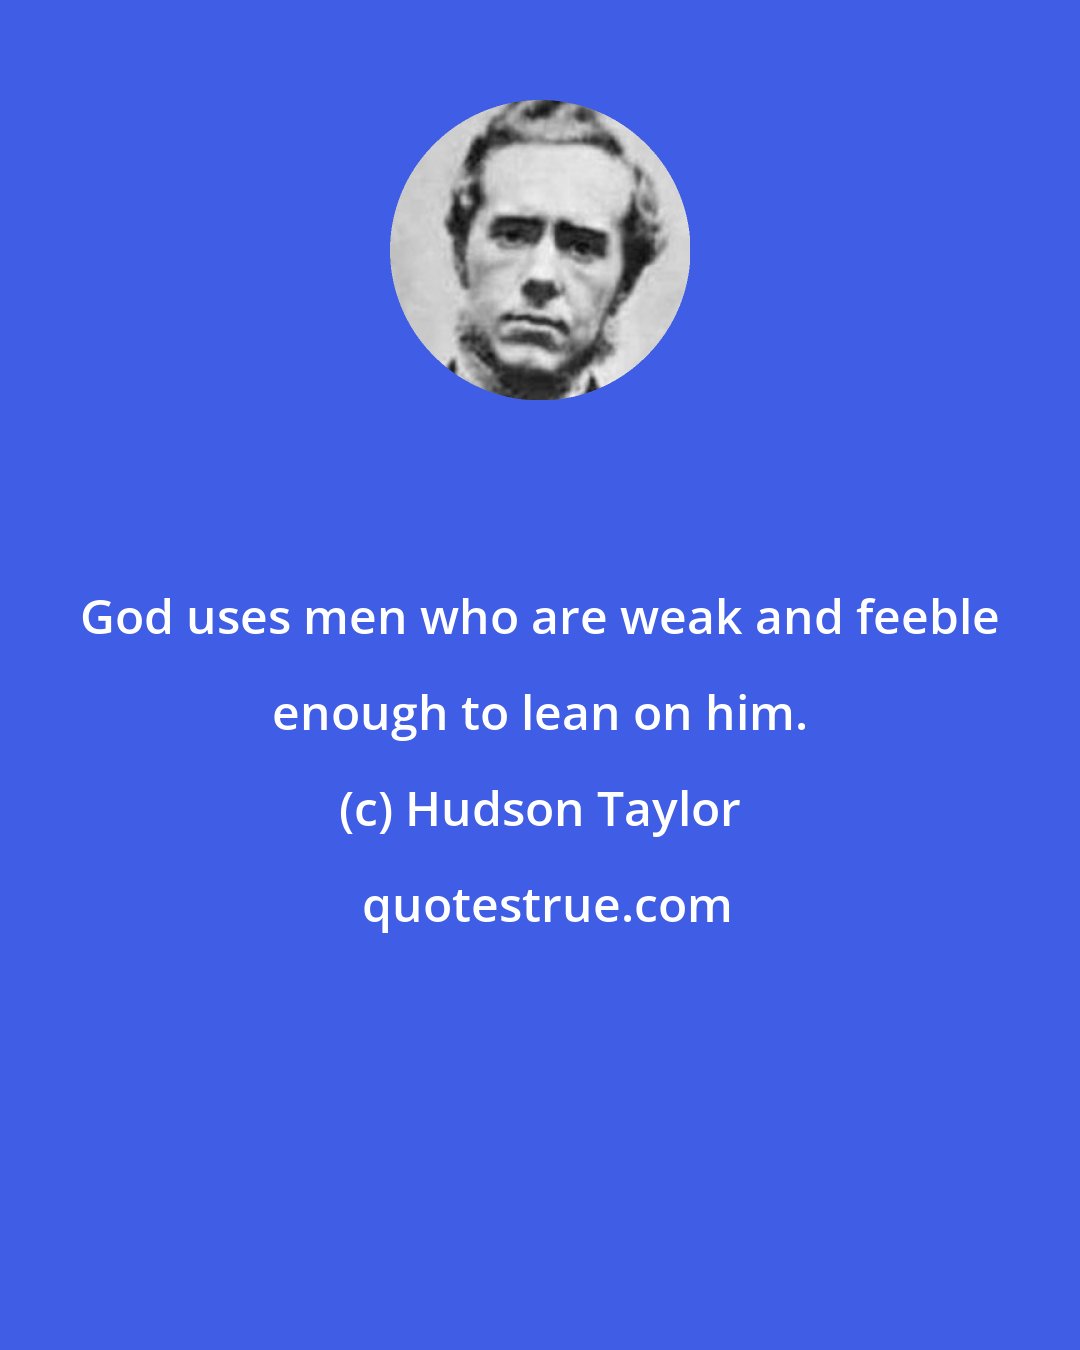 Hudson Taylor: God uses men who are weak and feeble enough to lean on him.